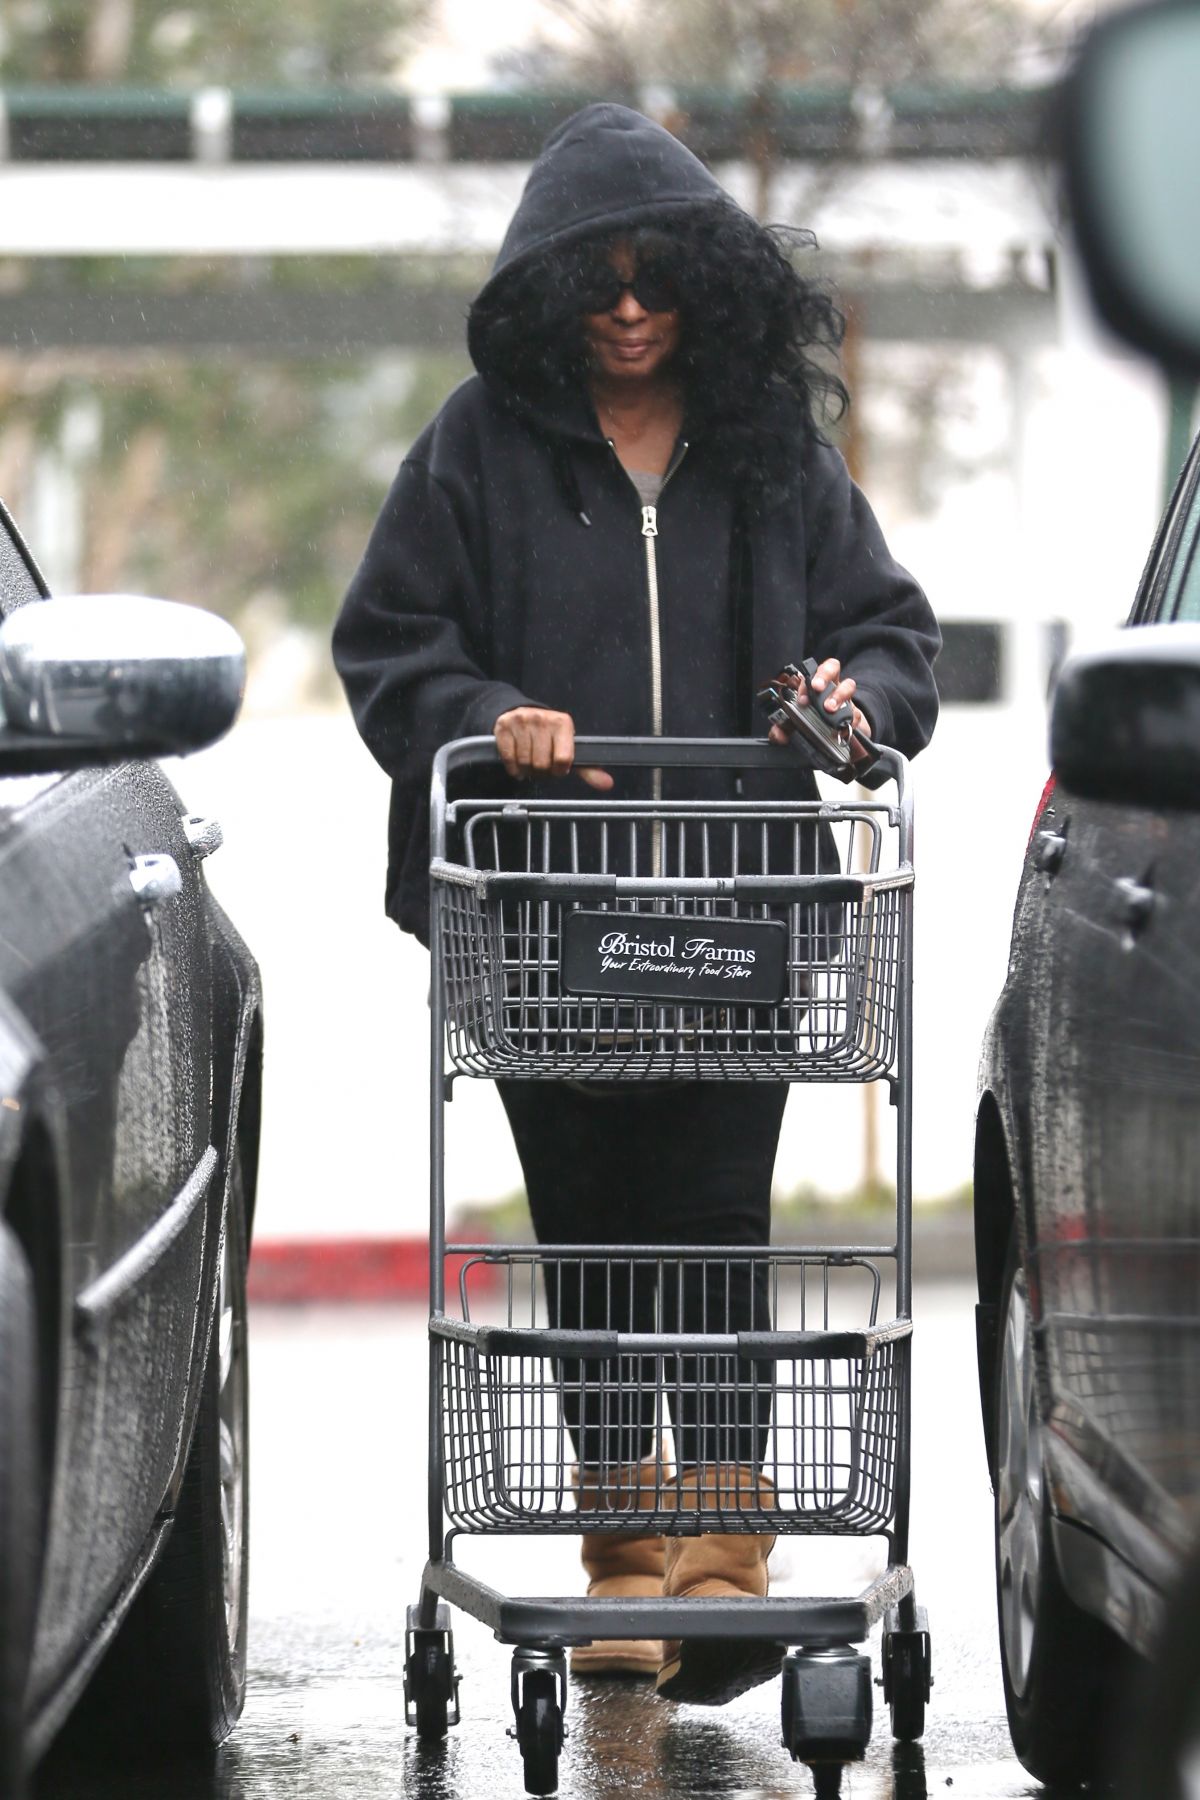 DIANA ROSS Shopping at Bristol Farms in Beverly Hills 02/03/2017